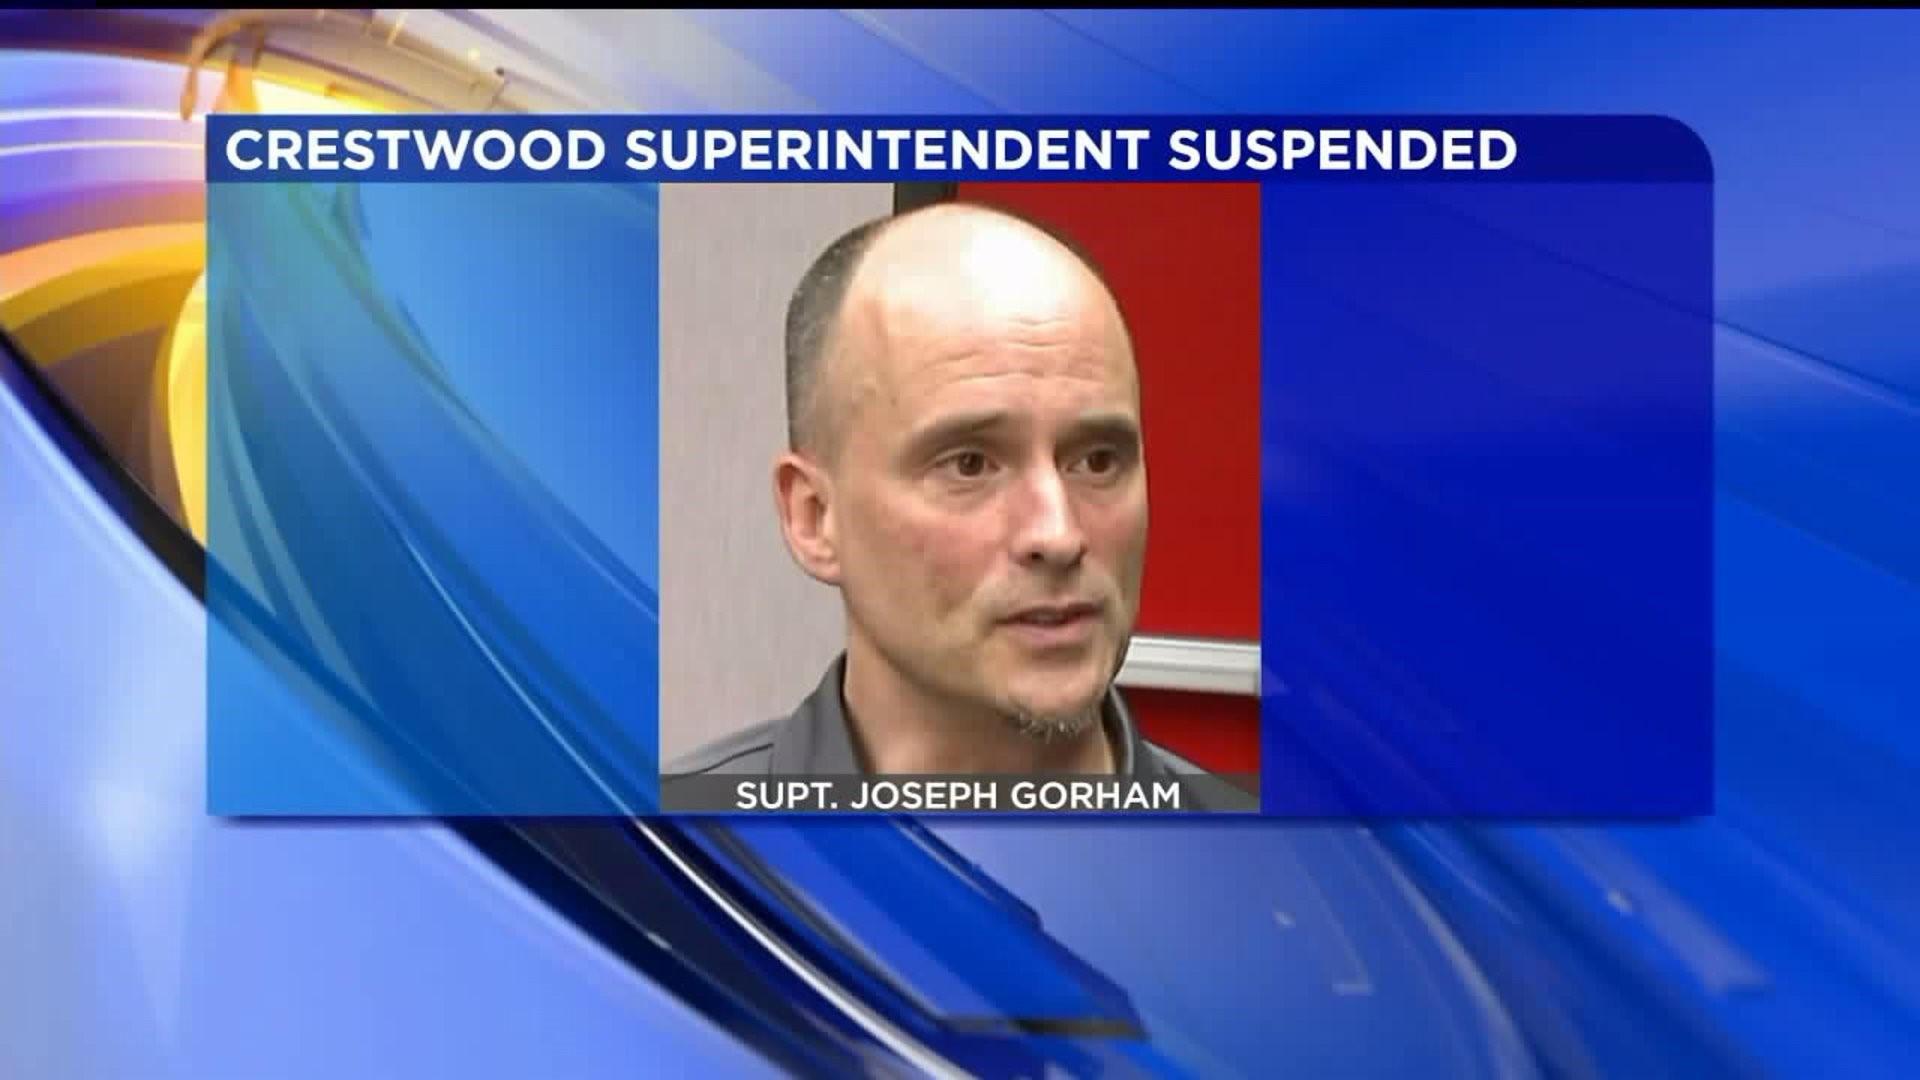 Community Members React to Crestwood Superintendent Suspension